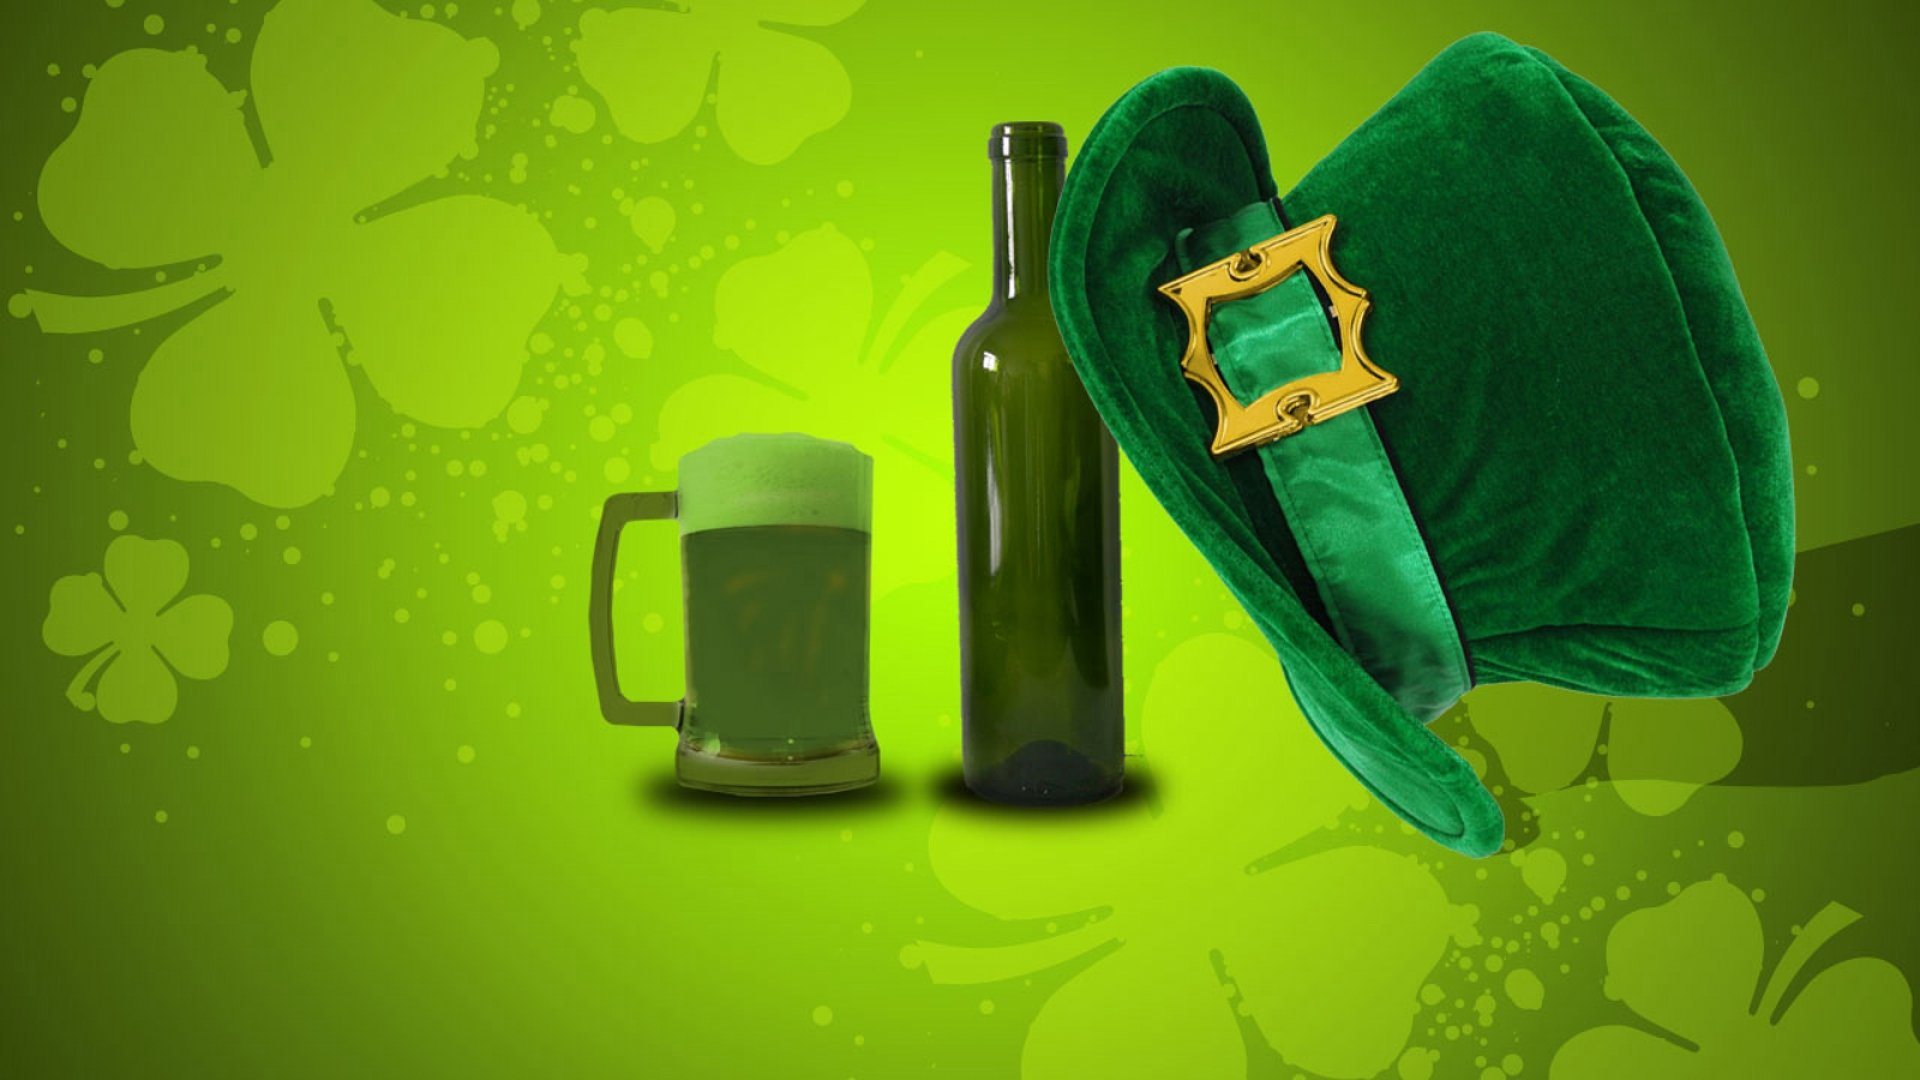 1920x1080 st patrick's day green hat and green beer